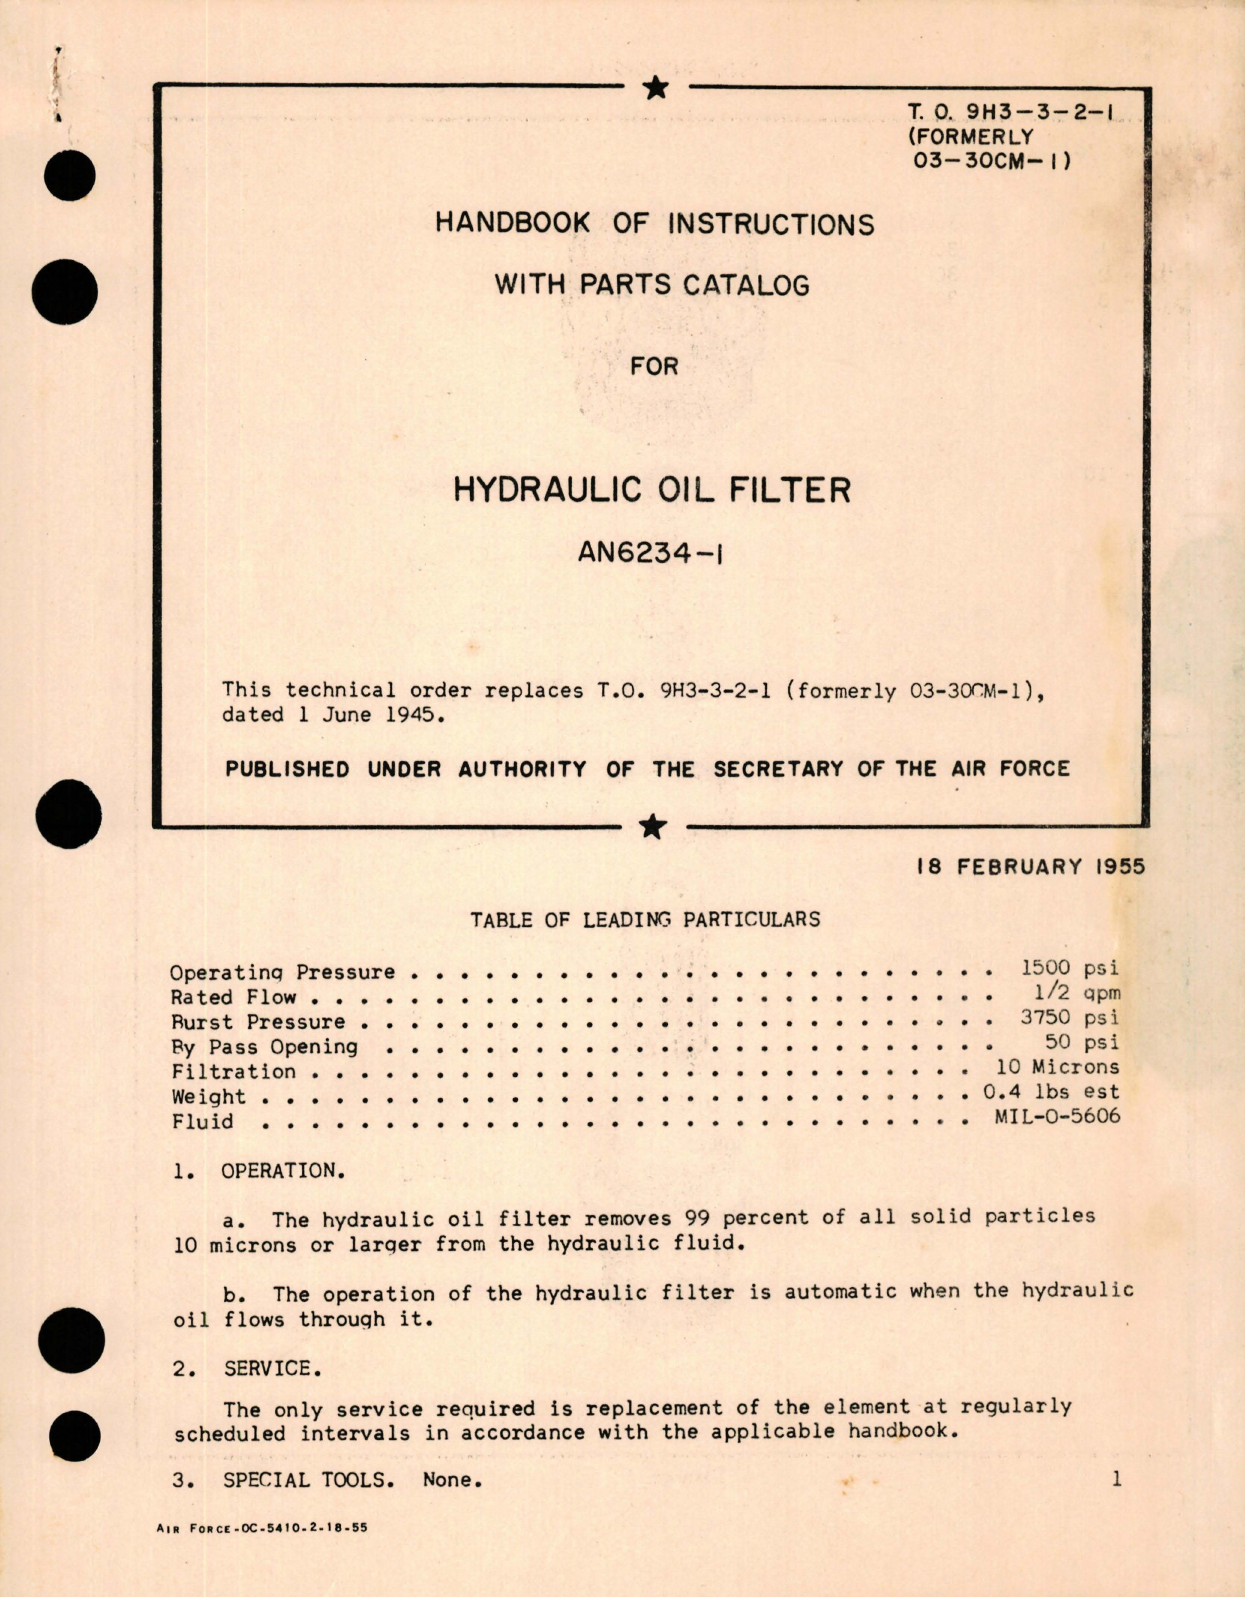 Sample page 1 from AirCorps Library document: Parts Catalog for Hydraulic Oil Filter - AN6234-1